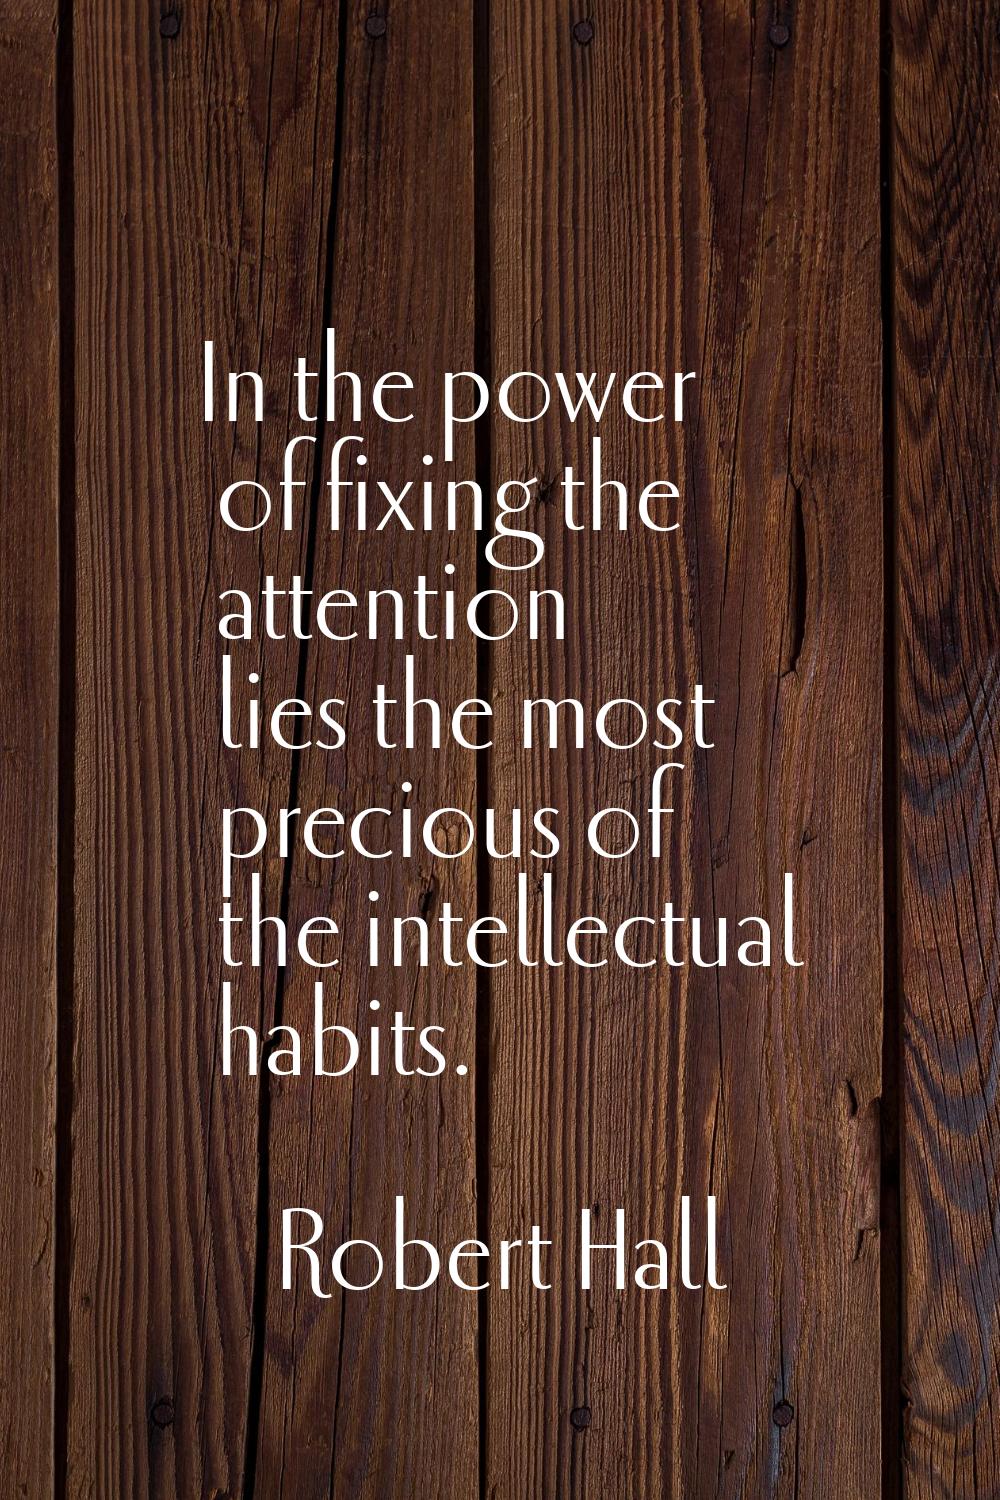 In the power of fixing the attention lies the most precious of the intellectual habits.